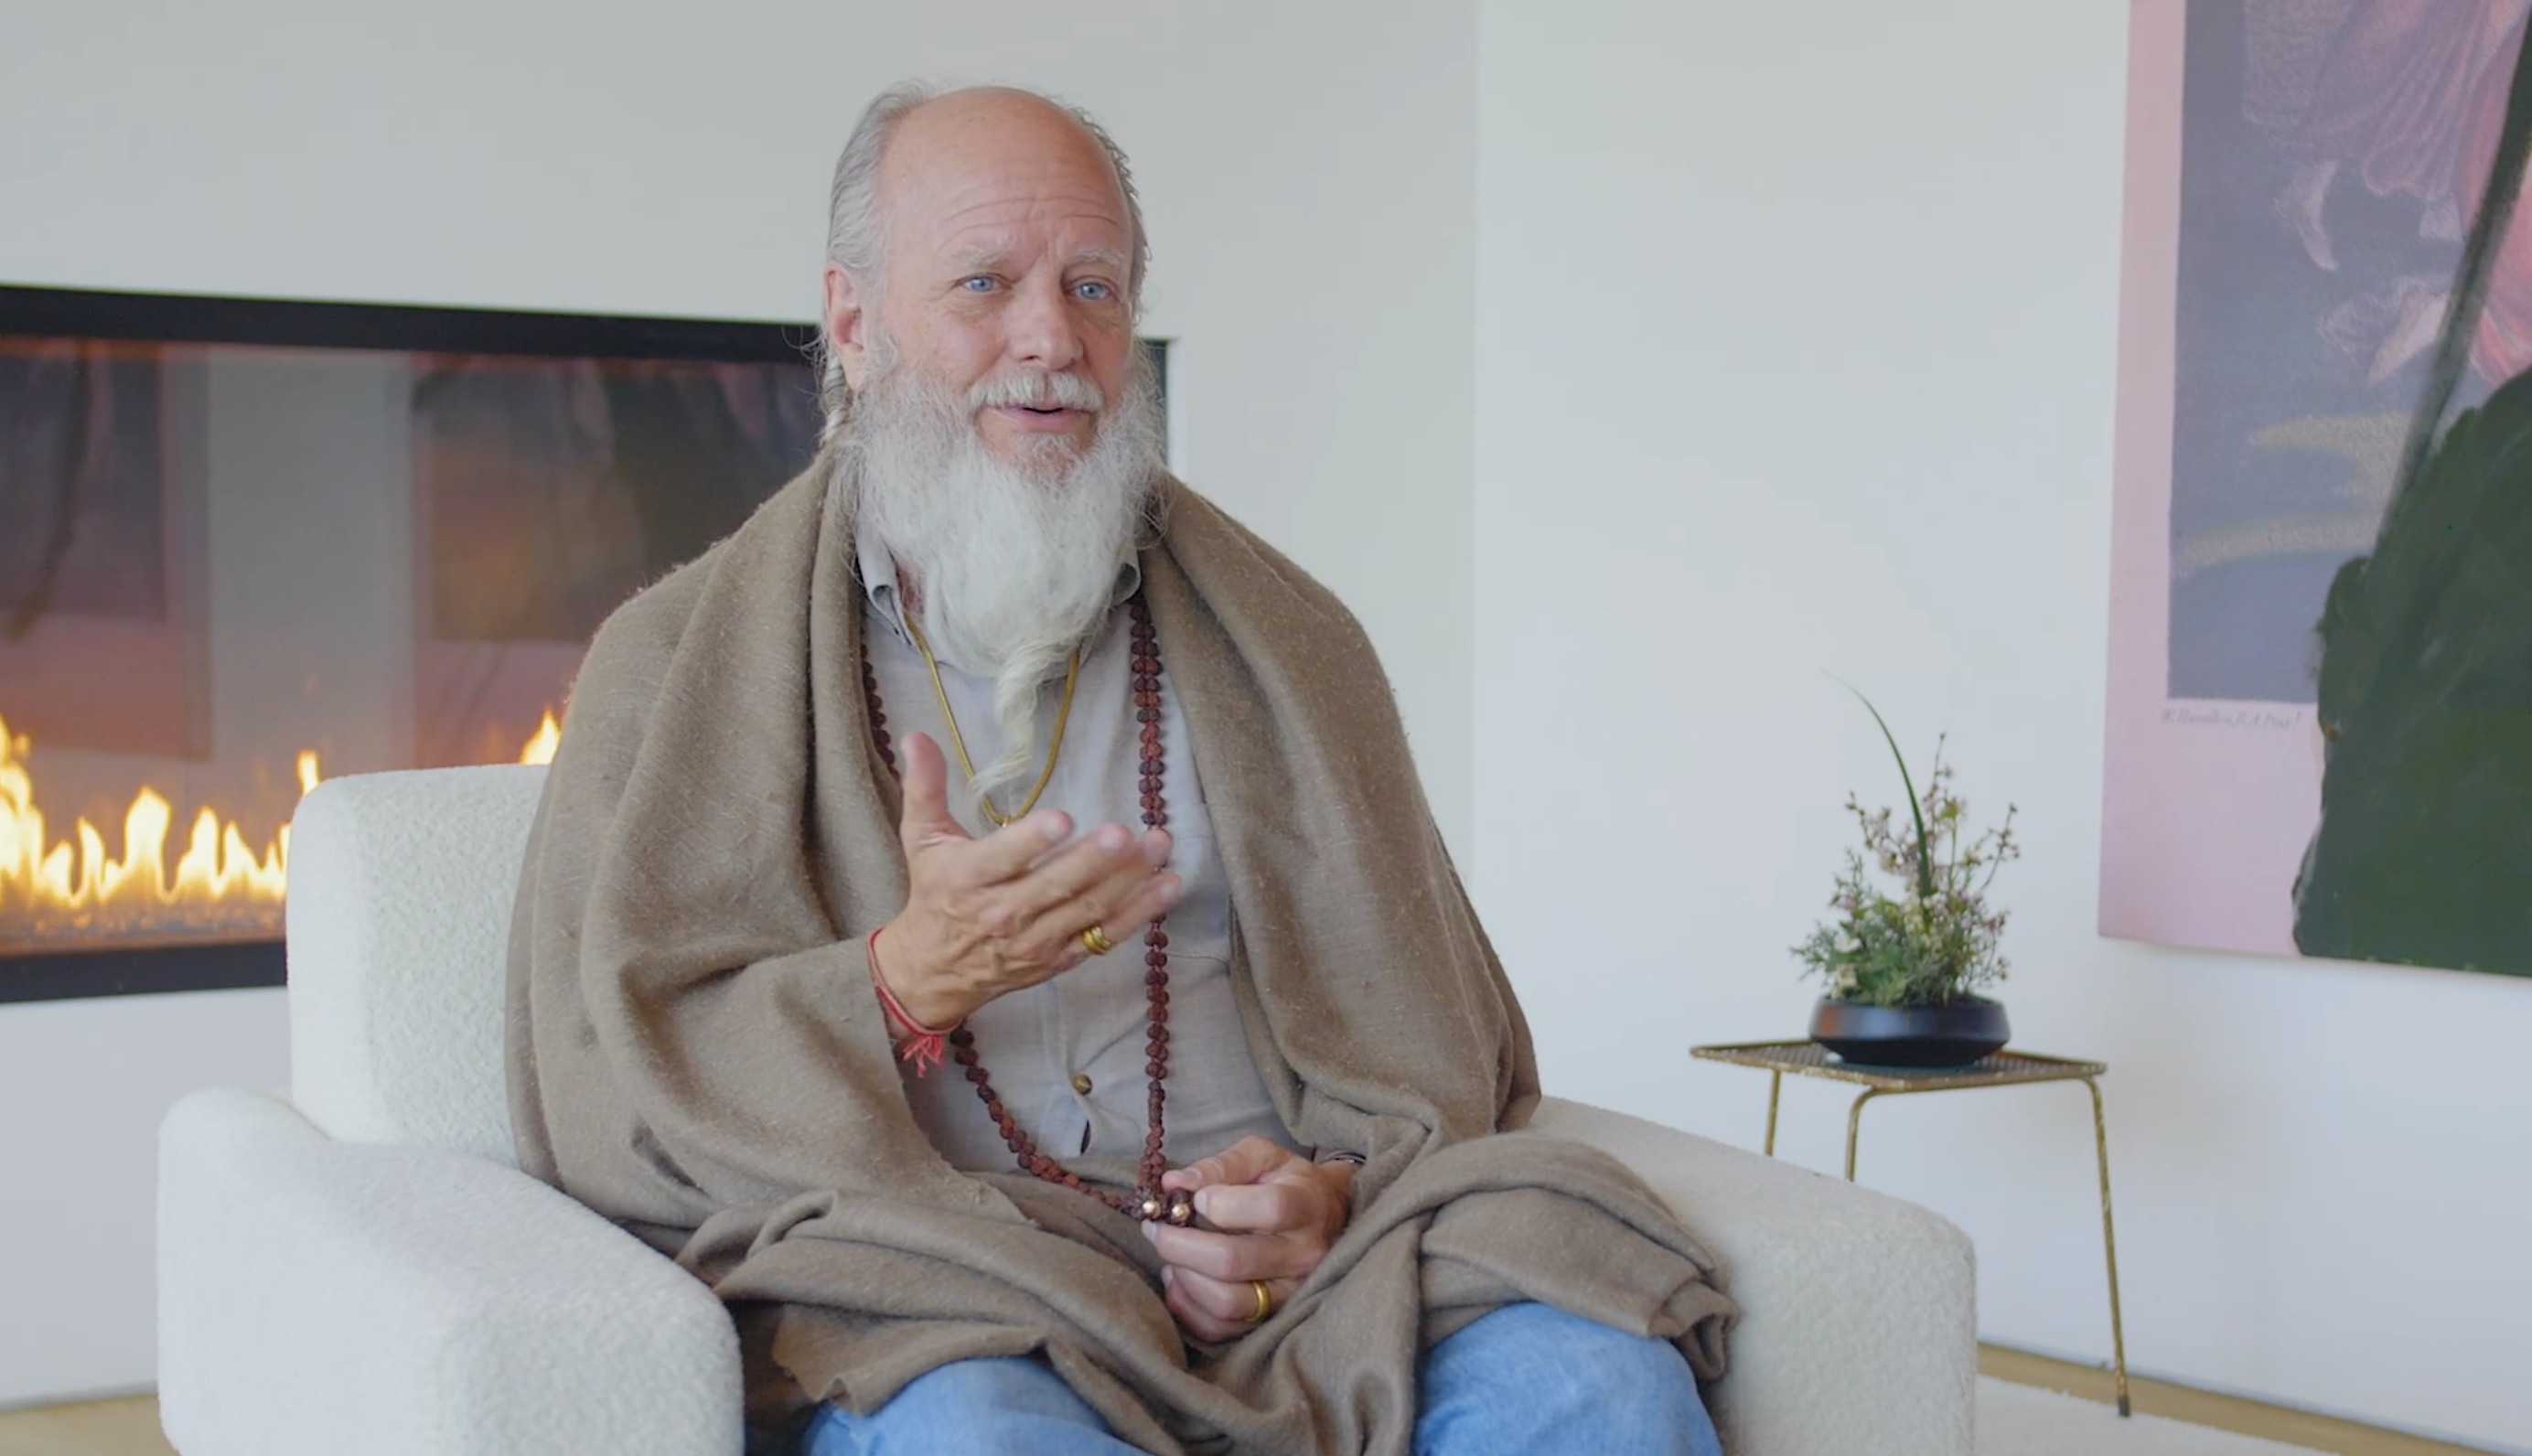 Thom Knoles, the creator of The Learn to Meditate Course